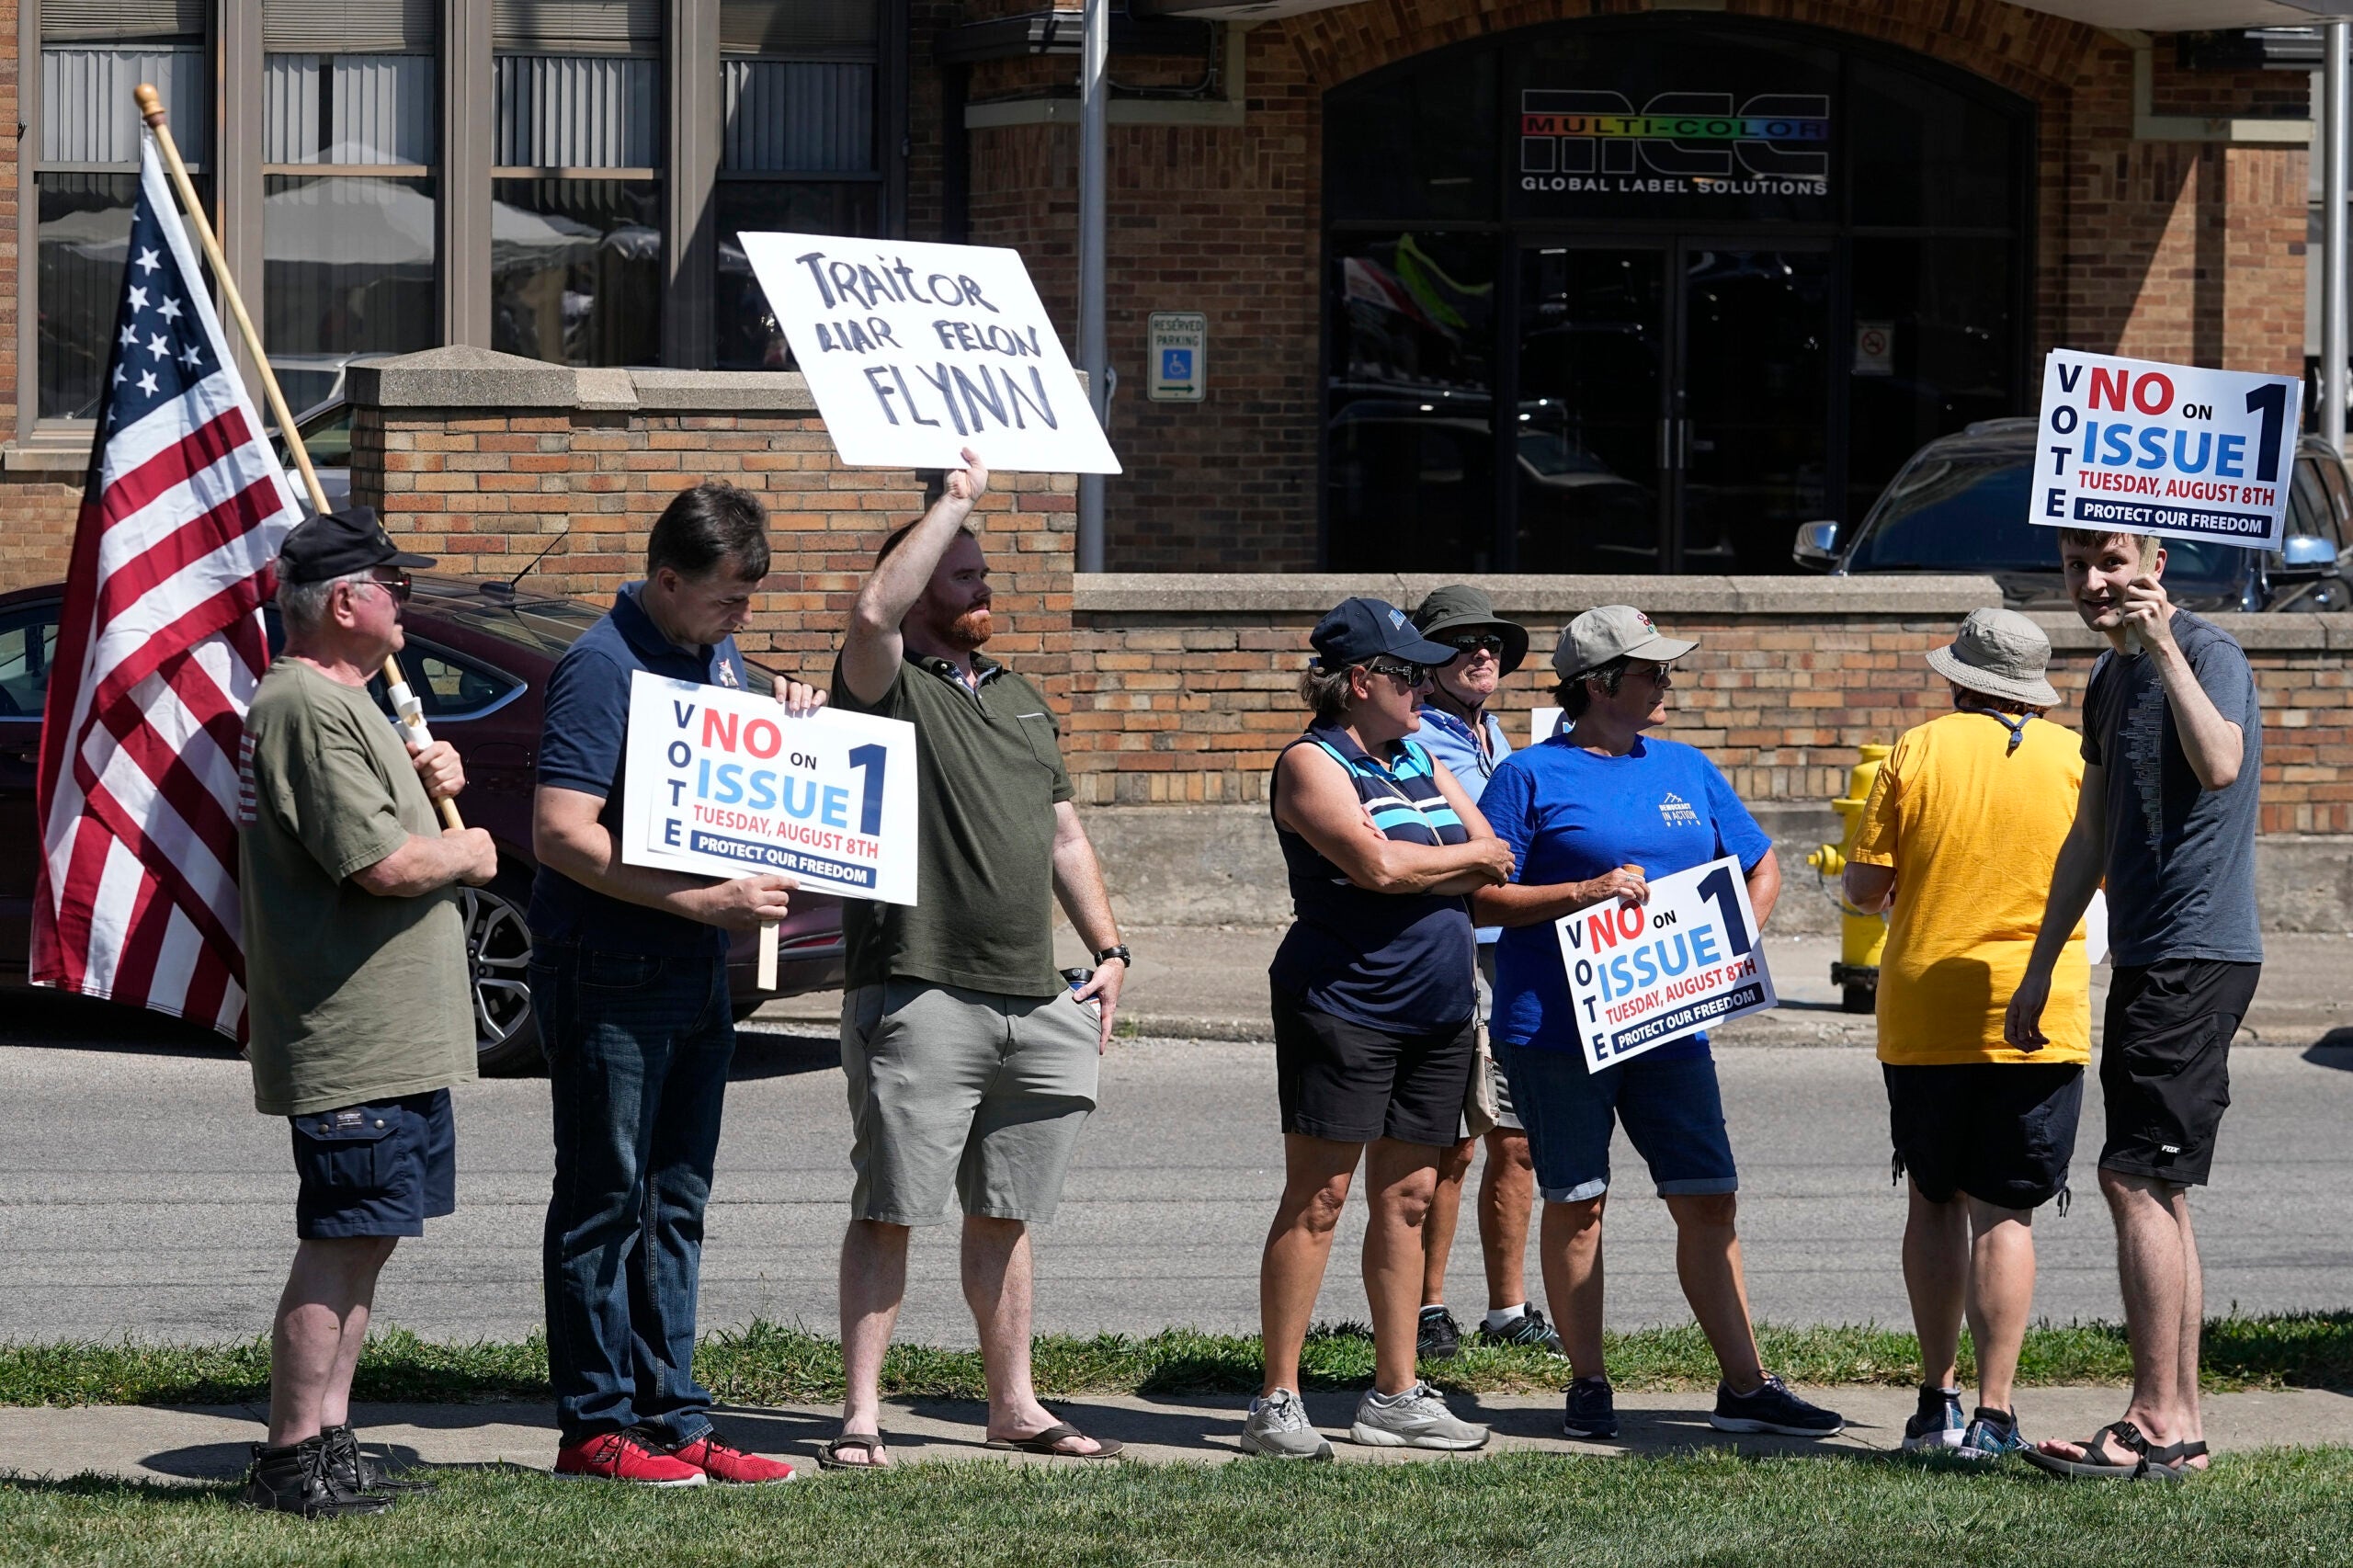 A small group of protestors gather during a "rosary rally" in Norwood, Ohio.